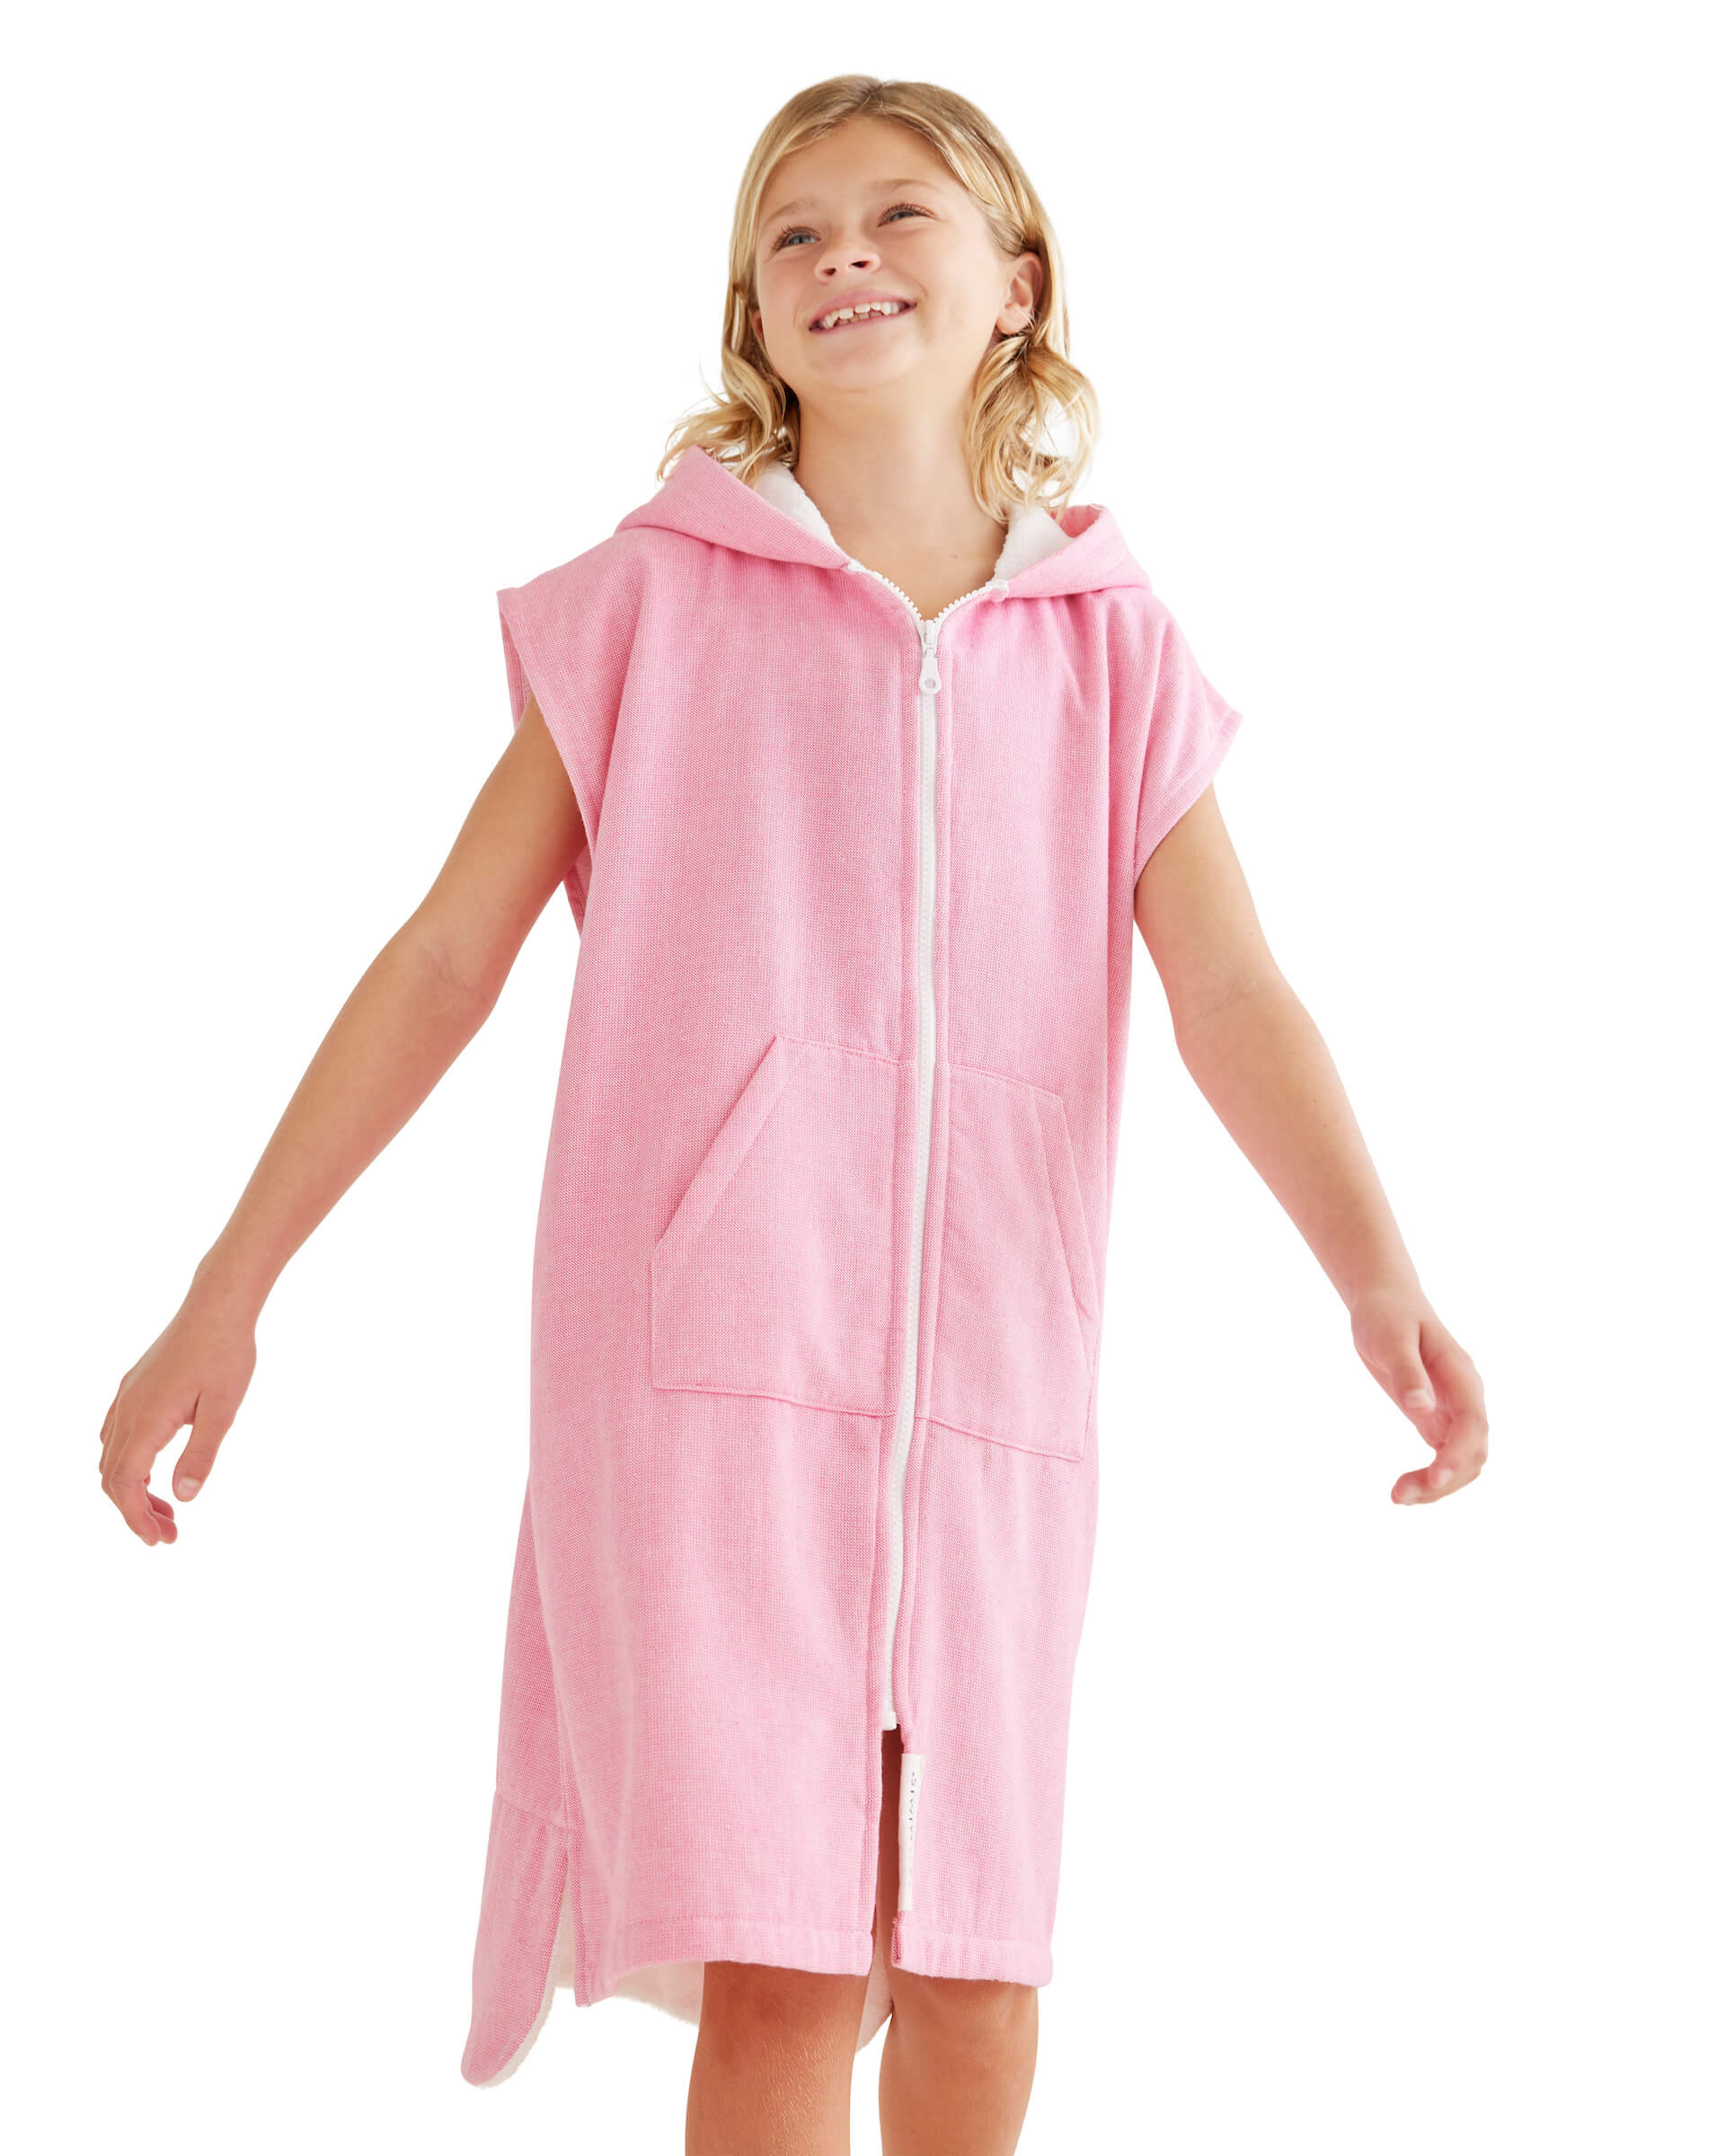 MONTEROSSO Kids Sleeveless Terry Hooded Towel: Pink